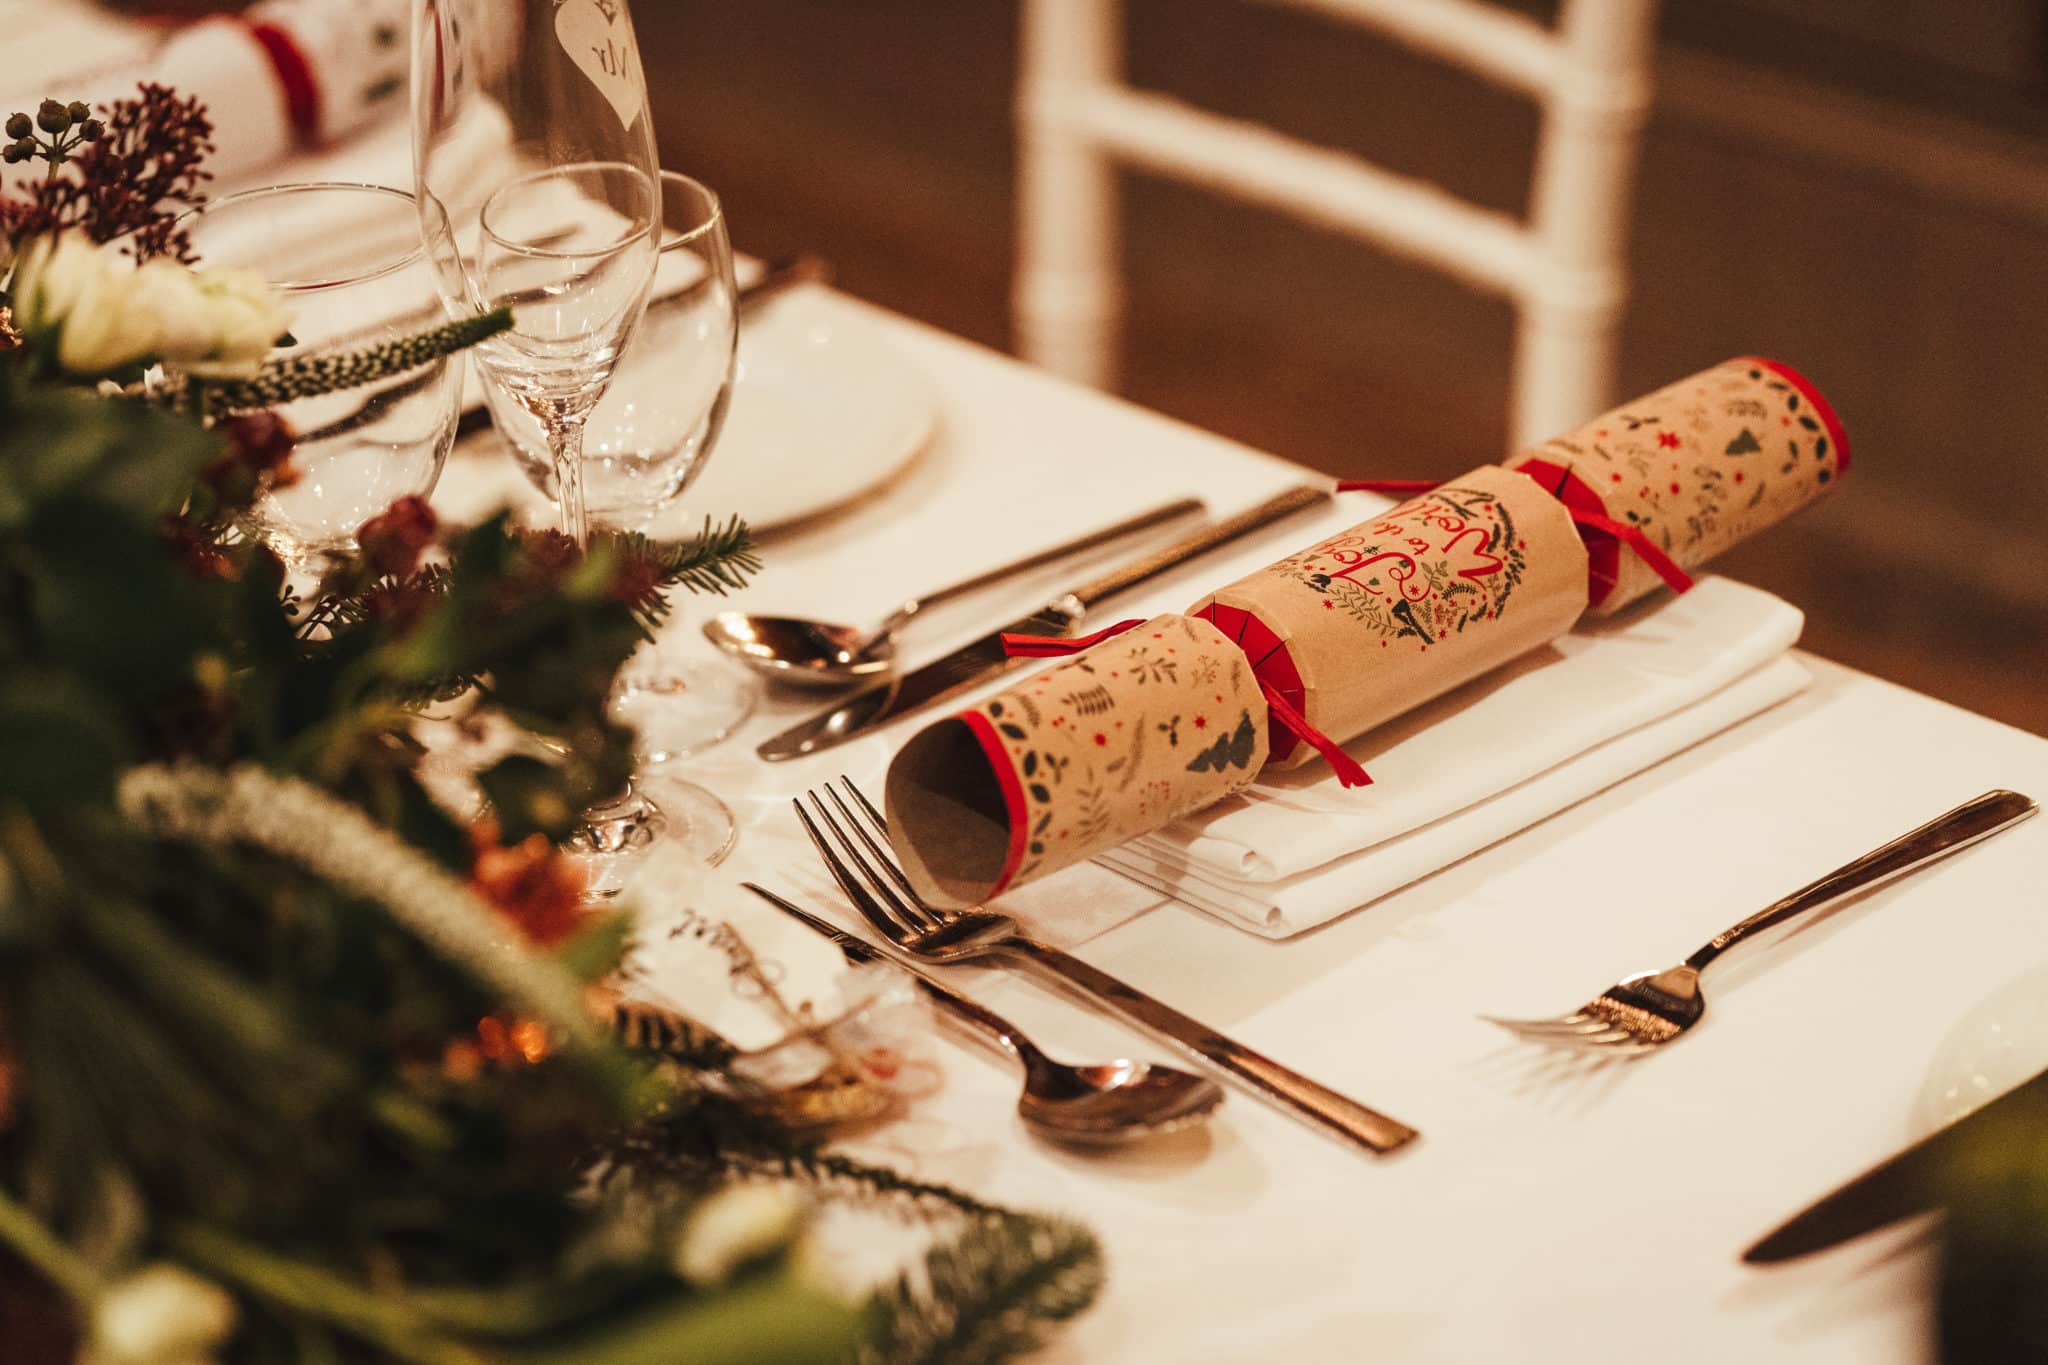 Table set with cutlery and a Christmas cracker